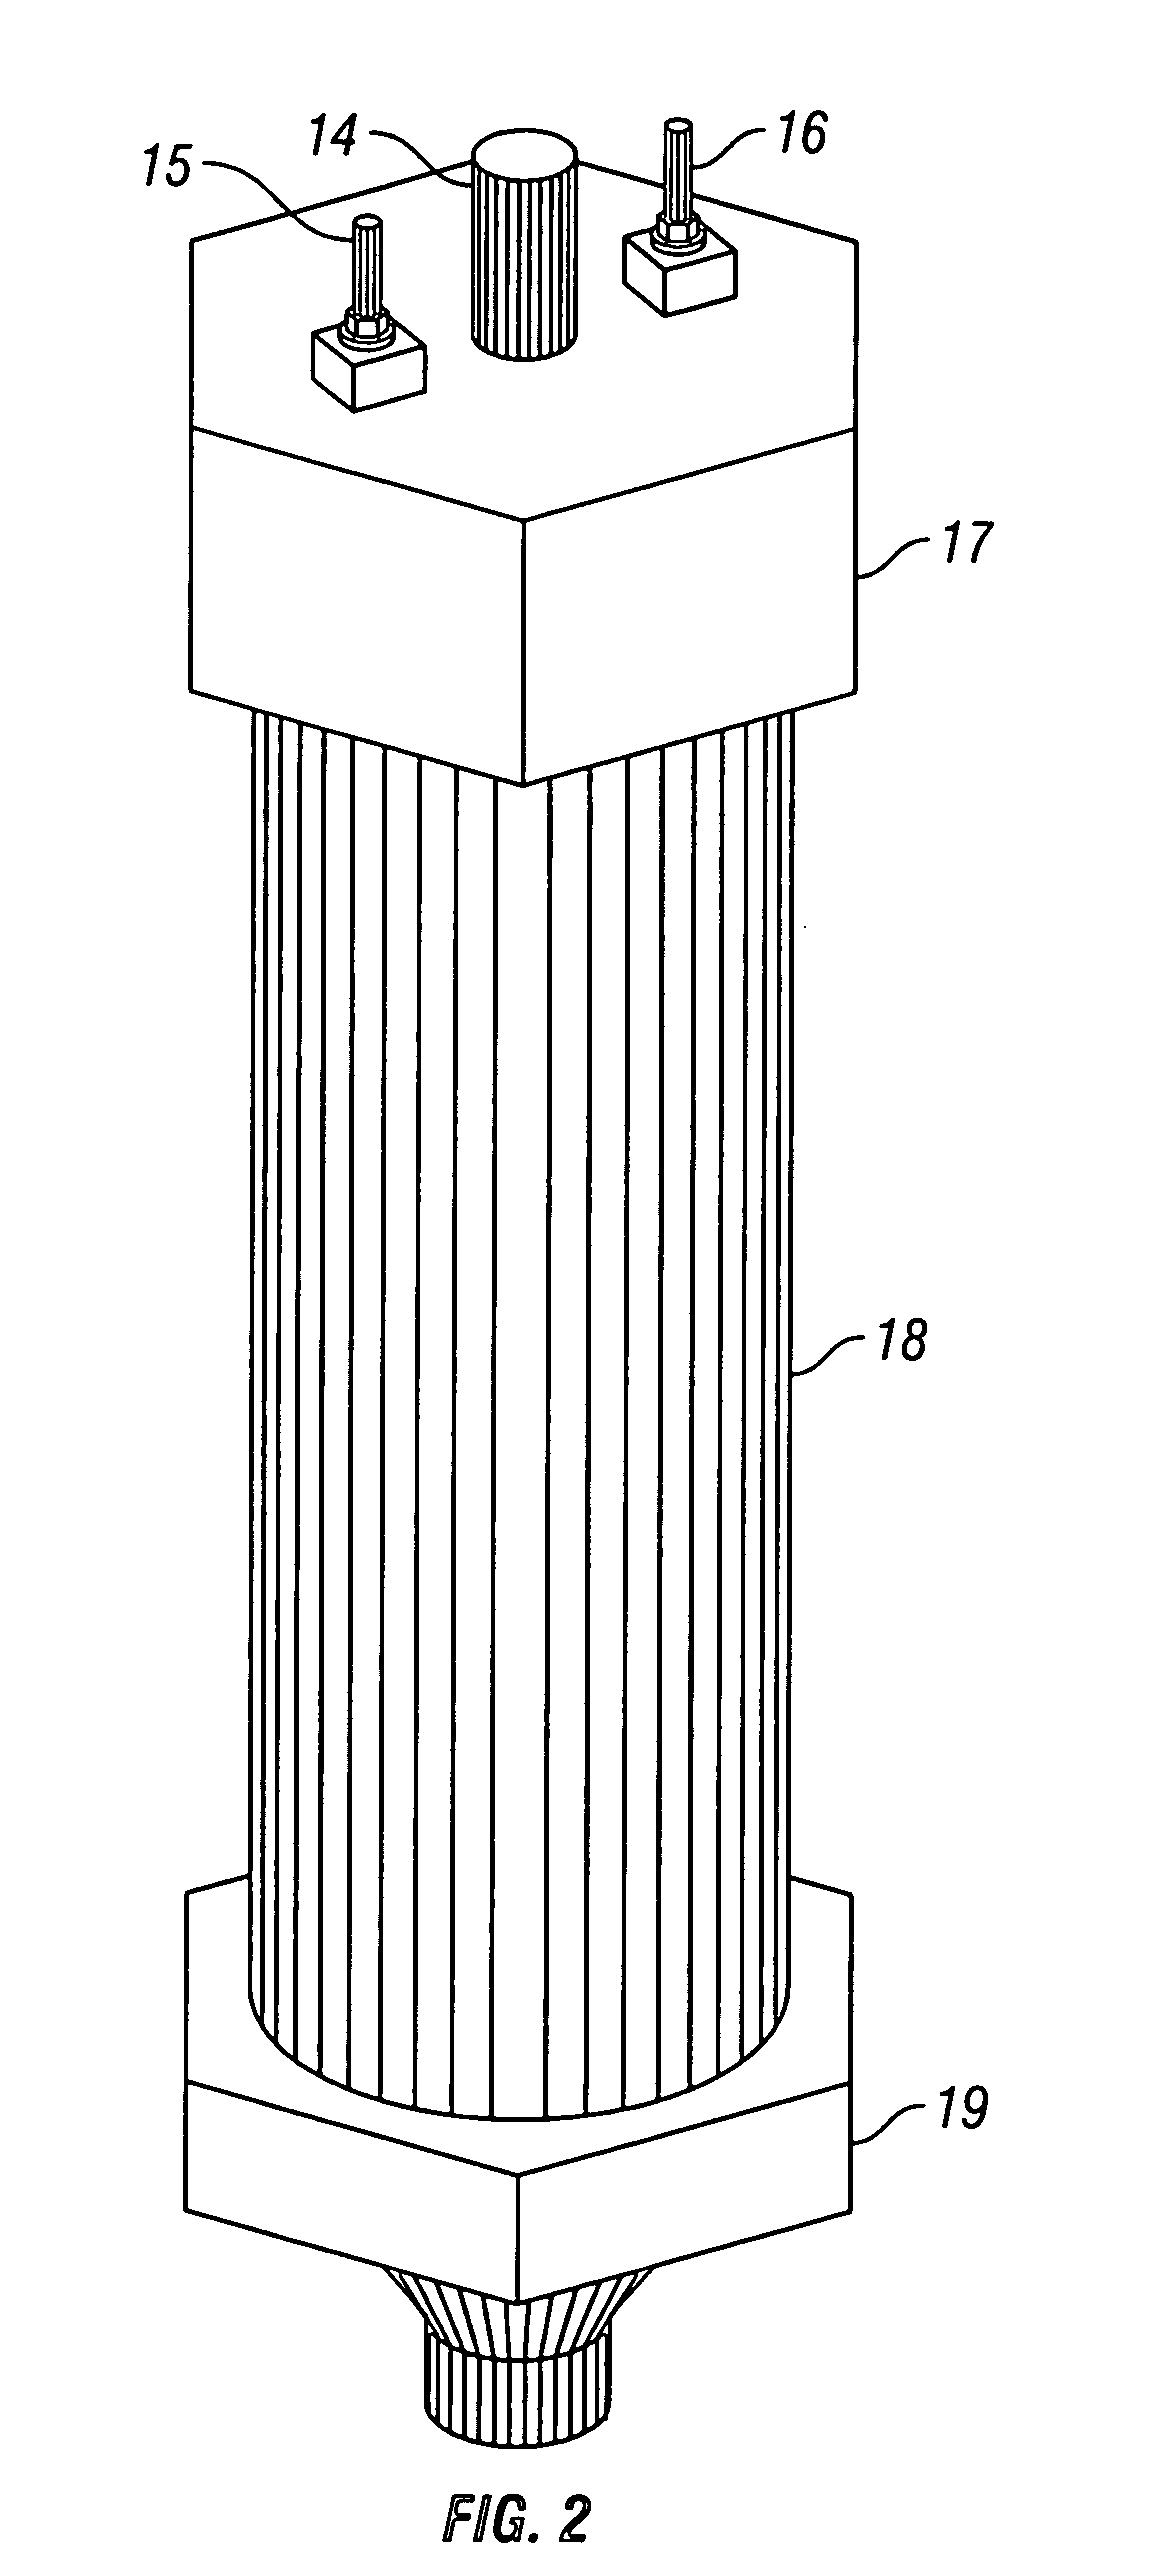 Cells and electrodes for electrocoagulation treatment of wastewater